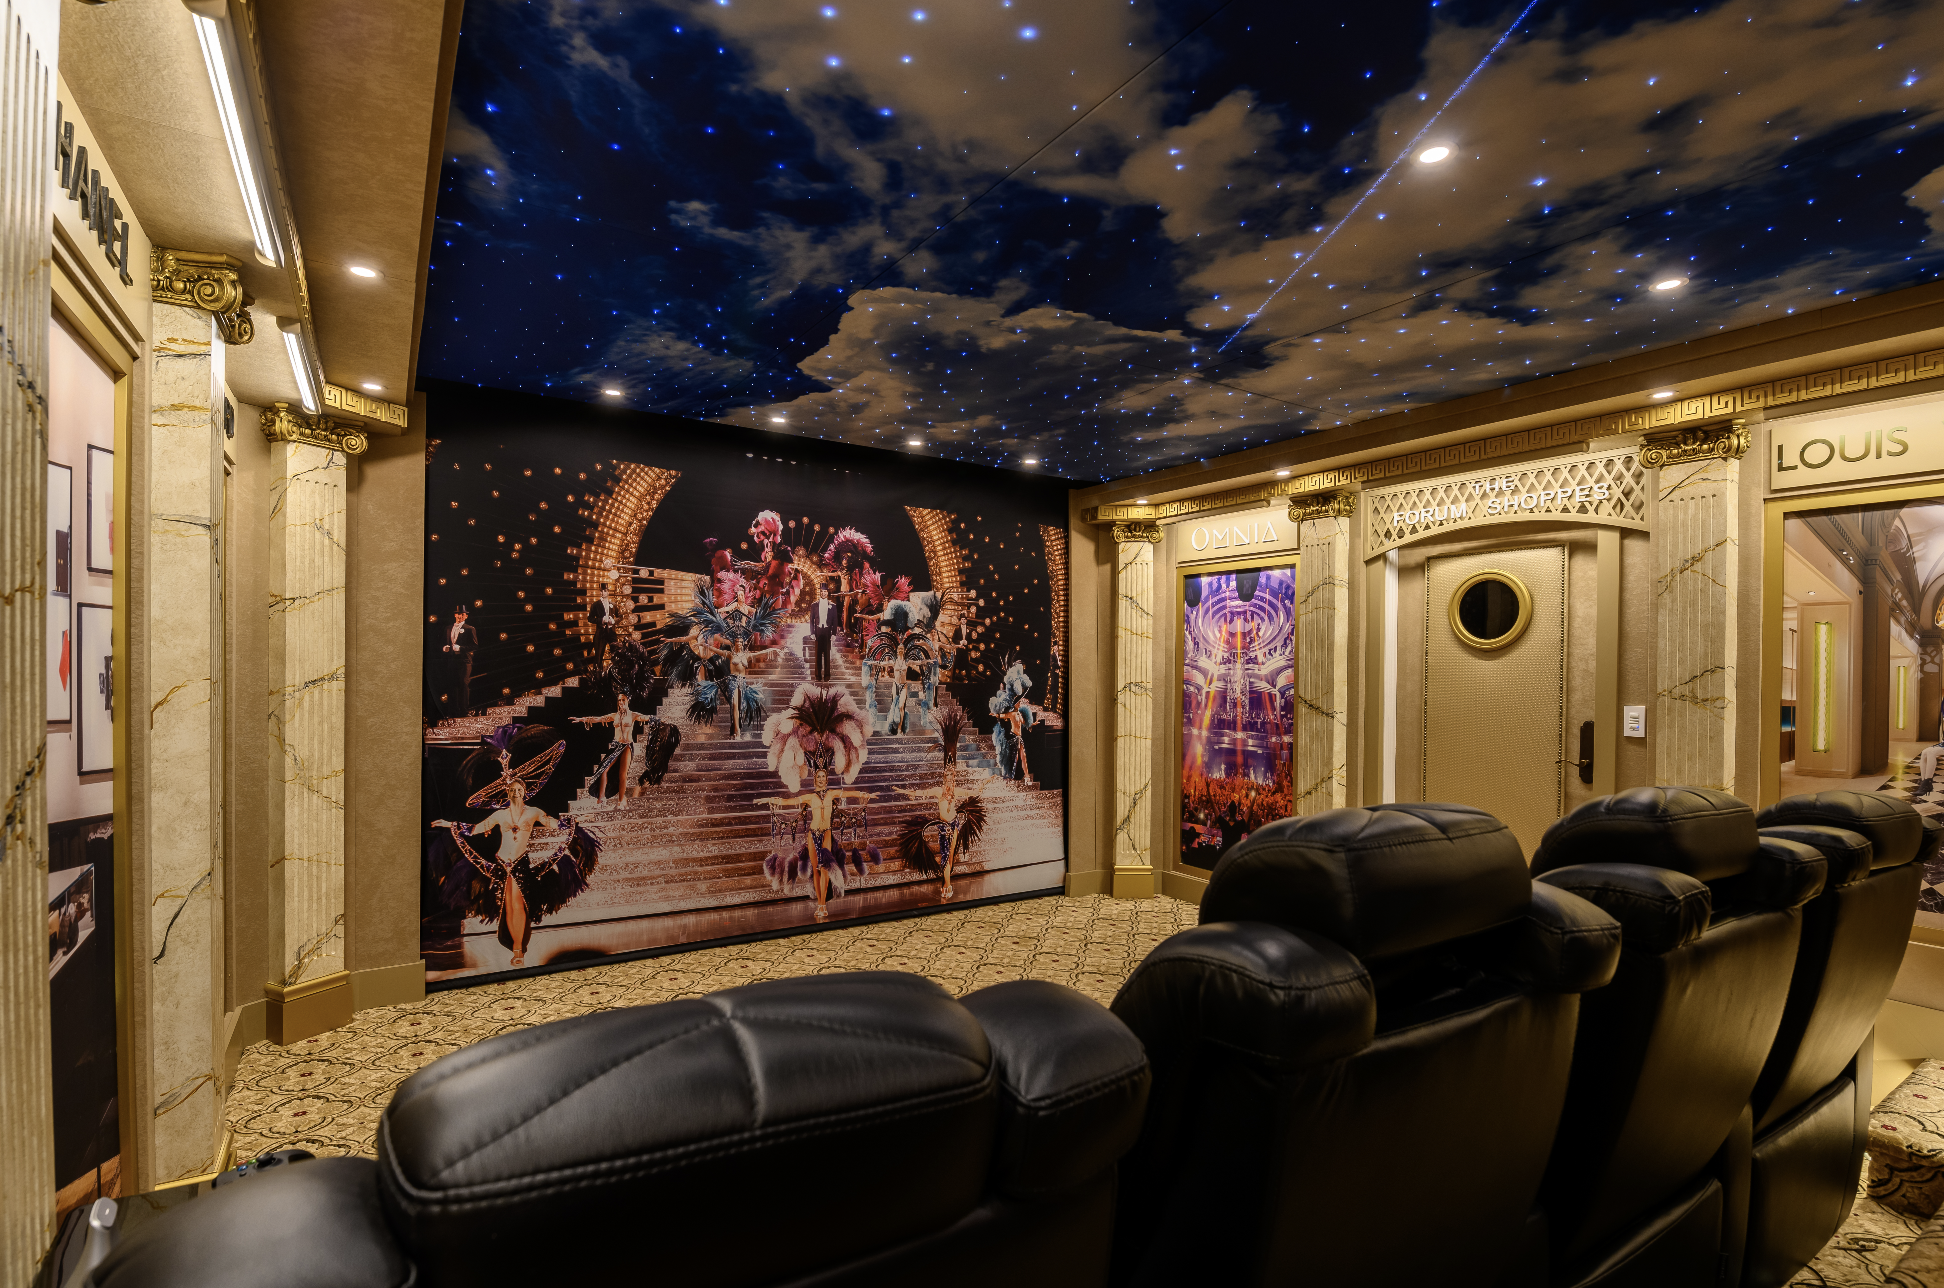 Las Vegas Theme Home Theater by Digital Installers South Bay 1 Custom Seating